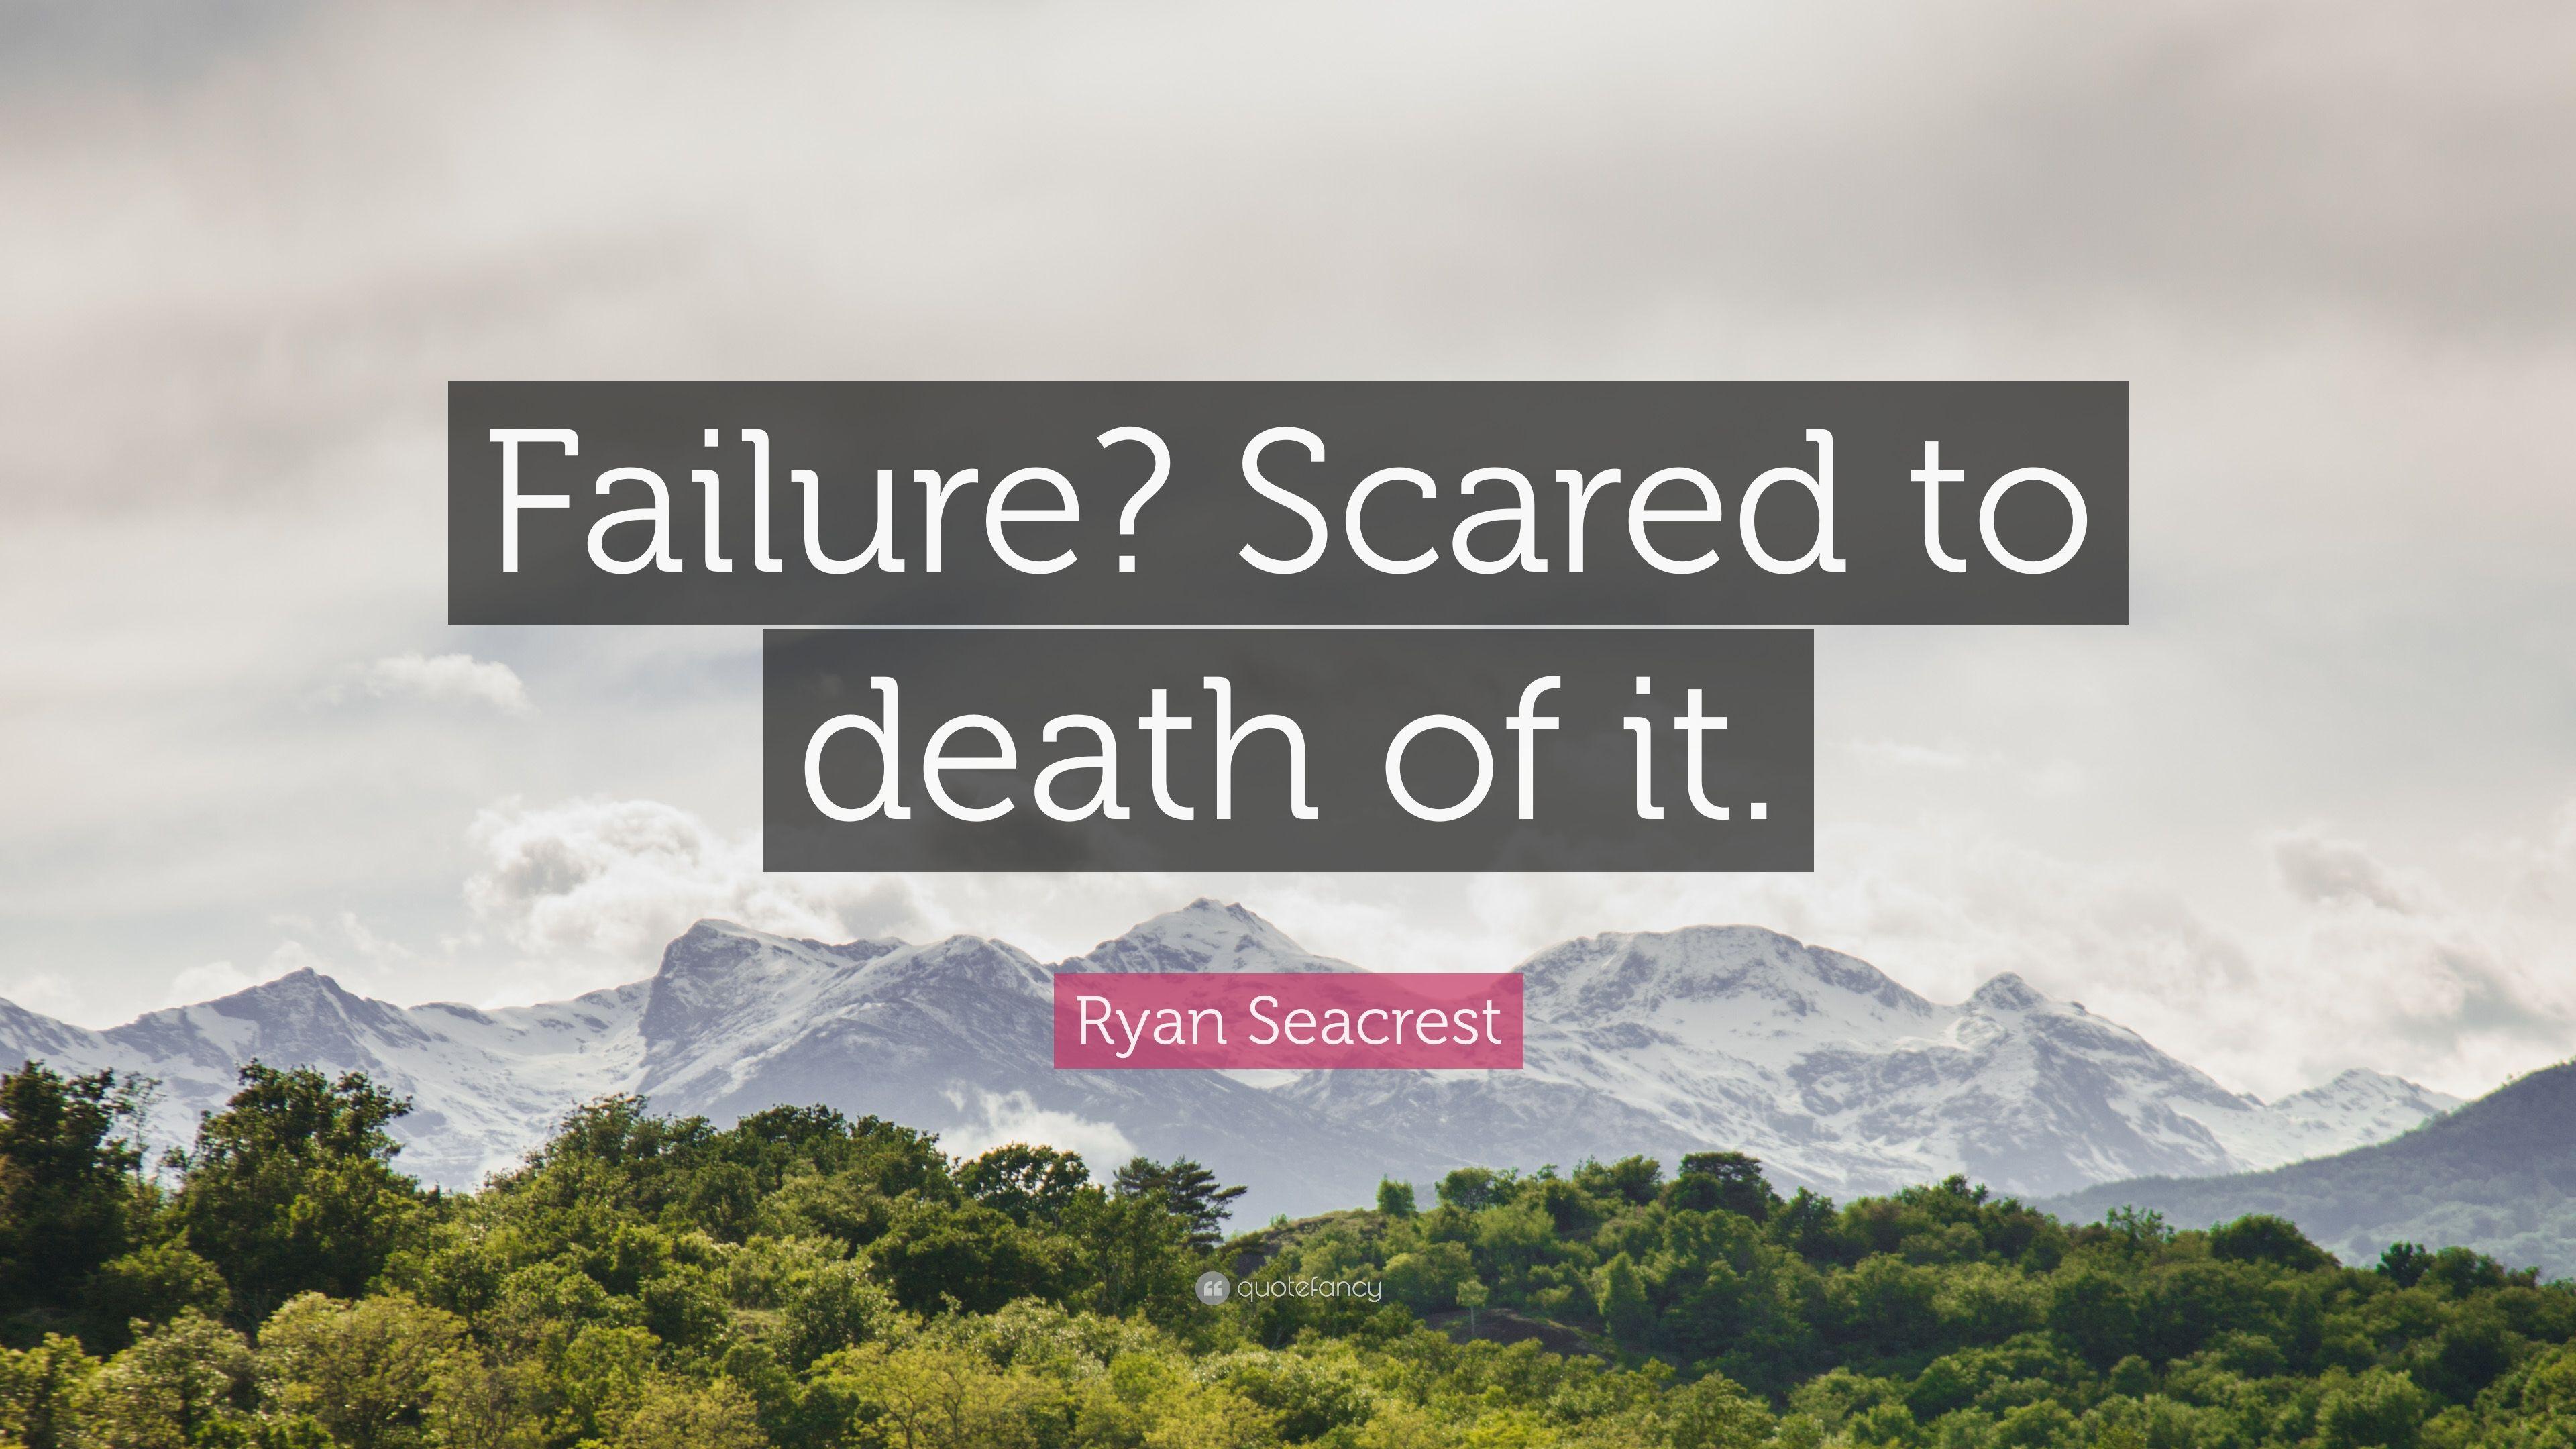 Ryan Seacrest Quote: “Failure? Scared to death of it.” 7 wallpaper